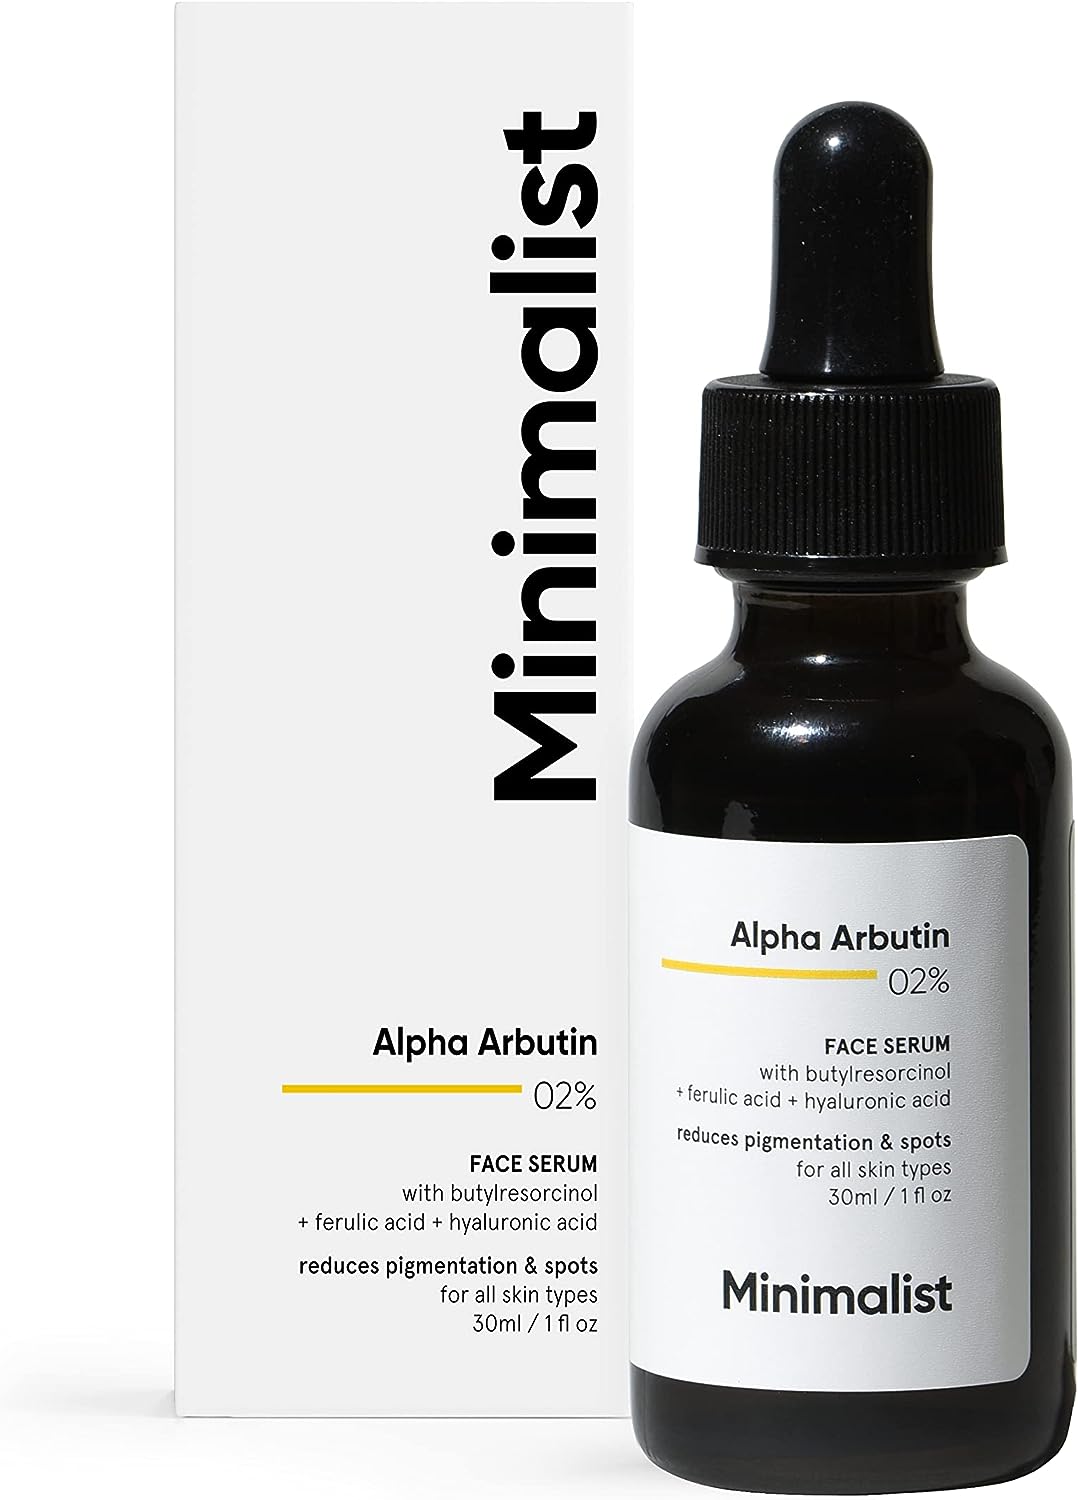 Minimalist Alpha Arbutin 2% for Dark Spots Sun Tanning | Face Serum with Hyaluronic Acid to Help with Blemishes, Dark Spots, PIH Uneven Skin Tone | 30ml